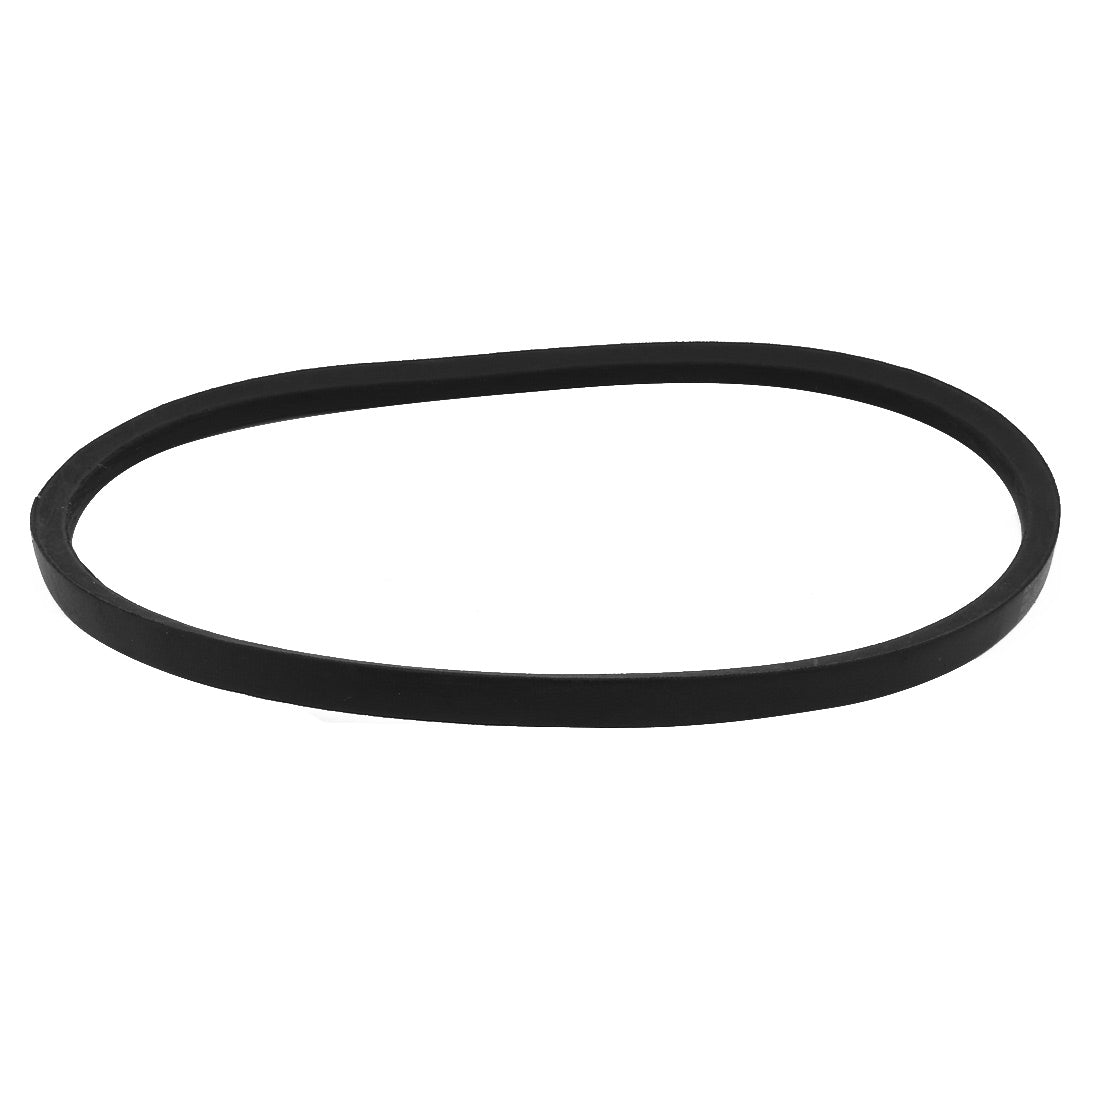 uxcell Uxcell A680 680mm Inner Girth Transmission Drive Belt Washing Machine Replacement